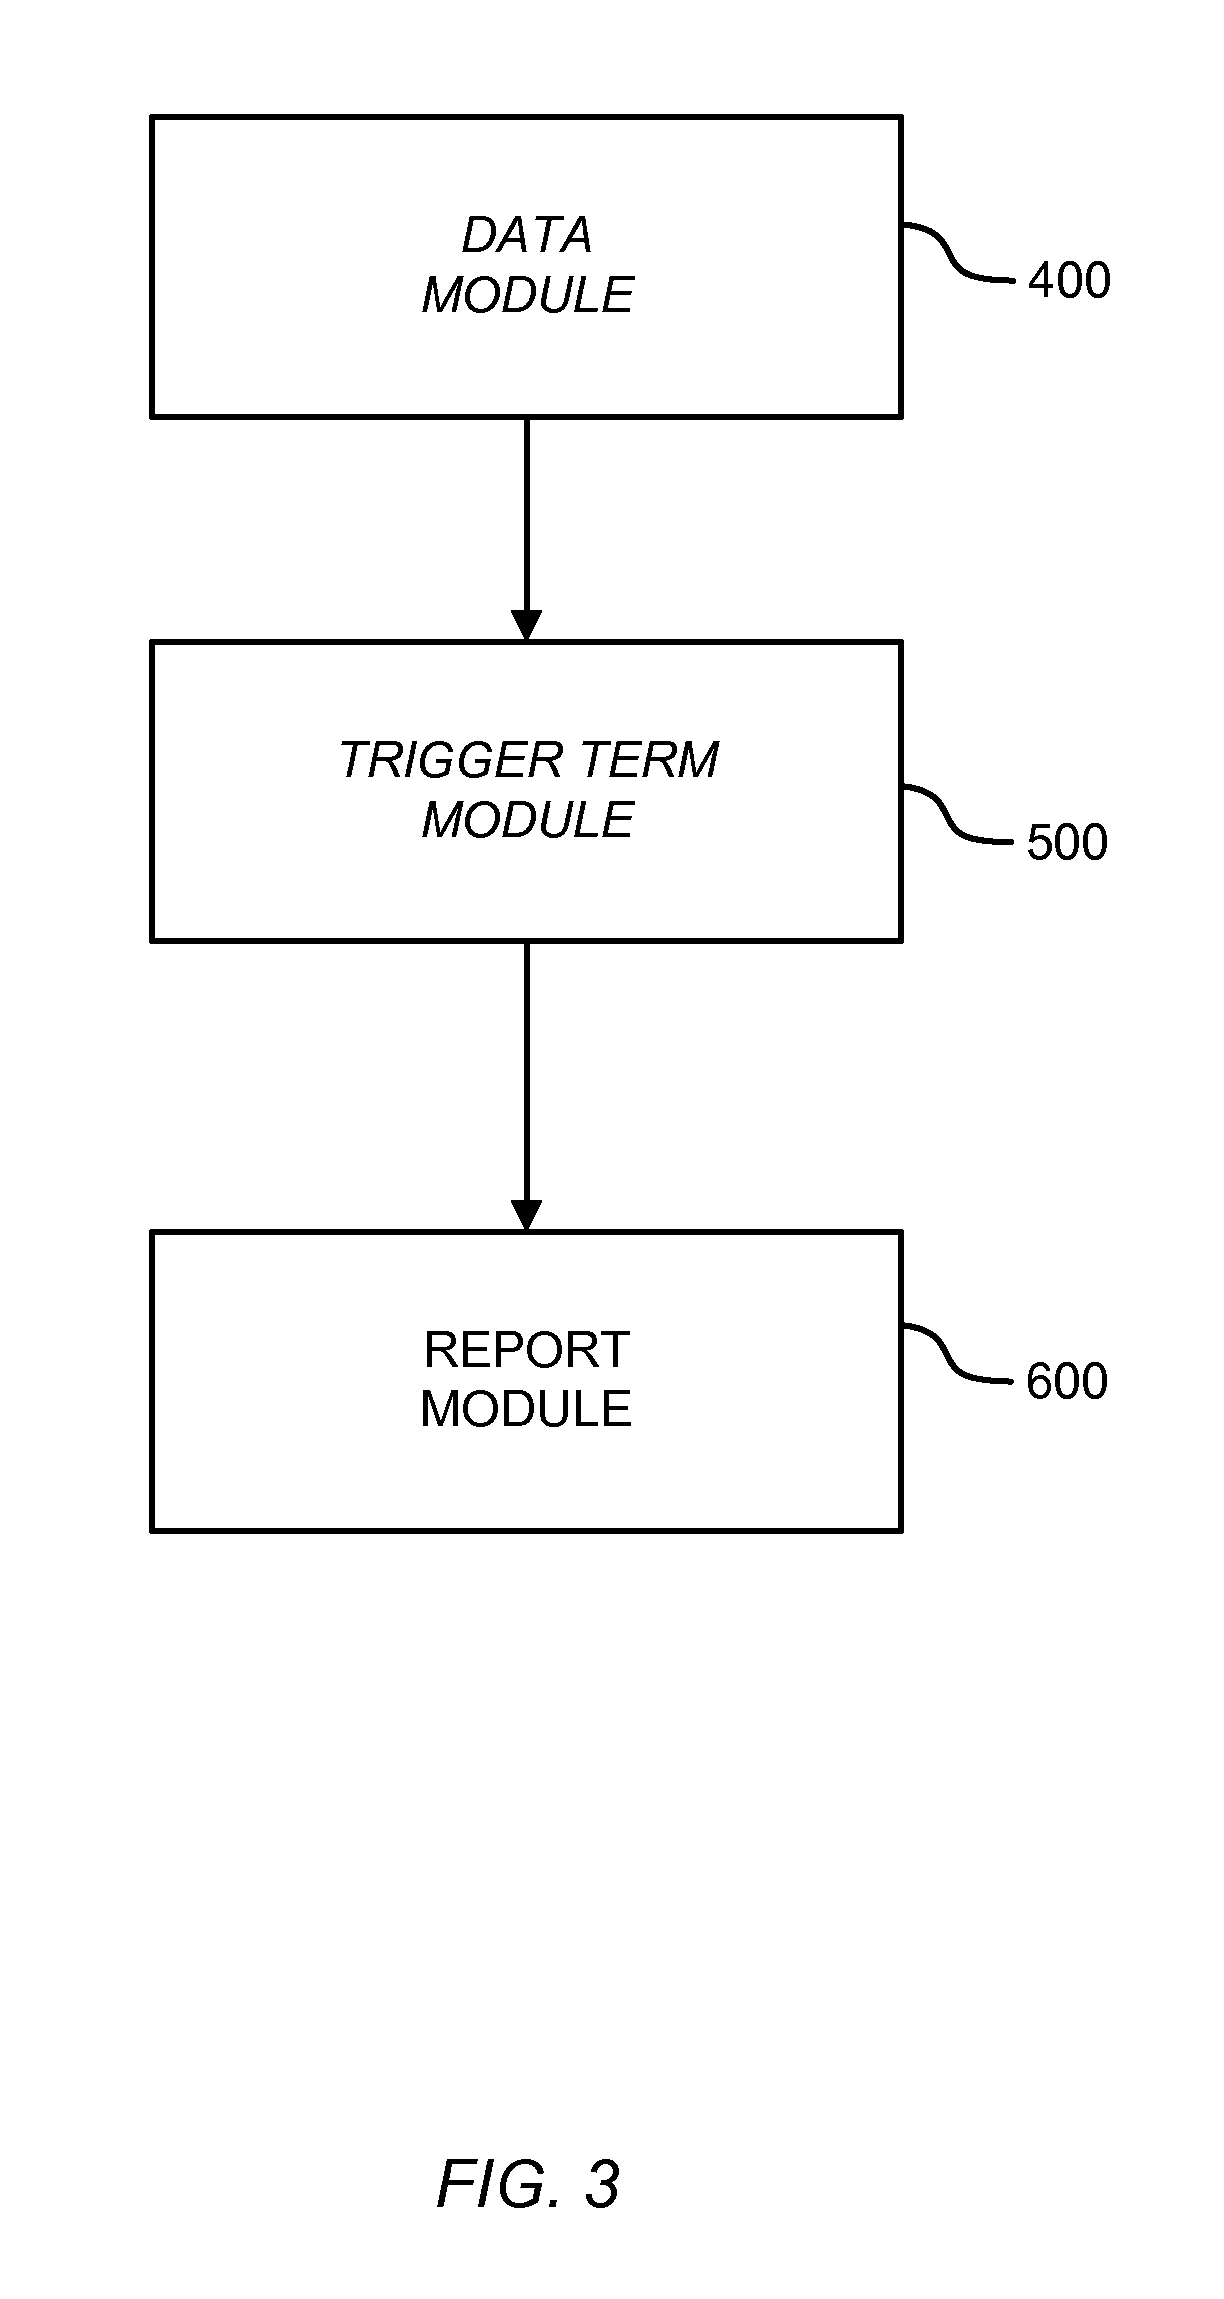 Systems, methods, and computer program products for a shipping application having an automated trigger term tool